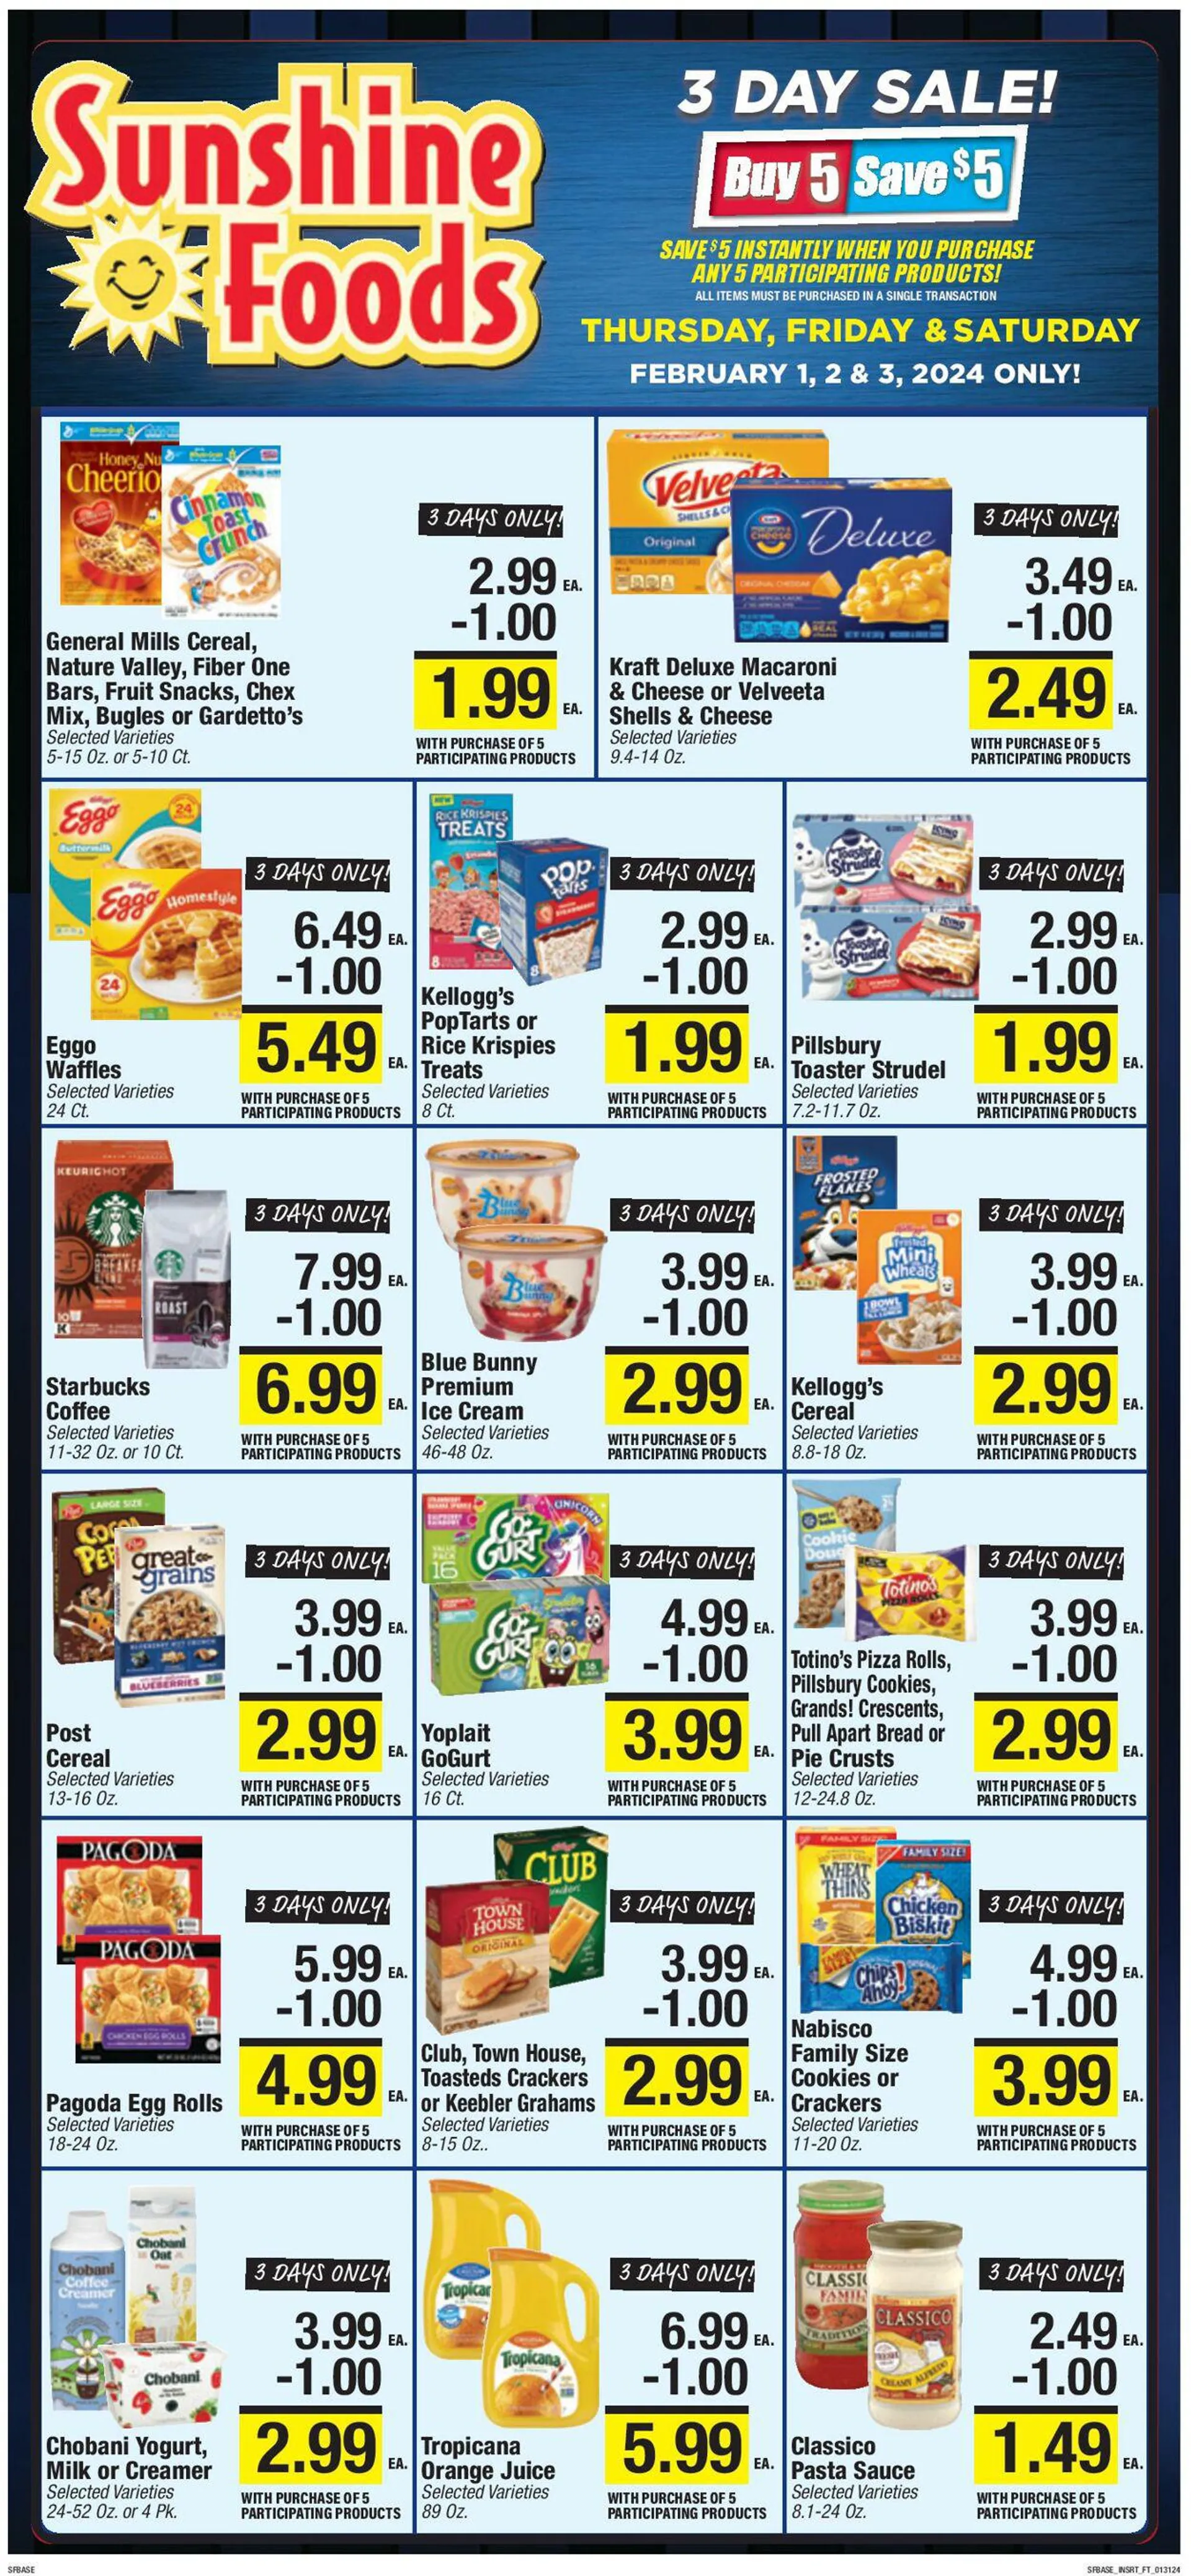 Weekly ad Sunshine Foods from January 31 to February 6 2024 - Page 9